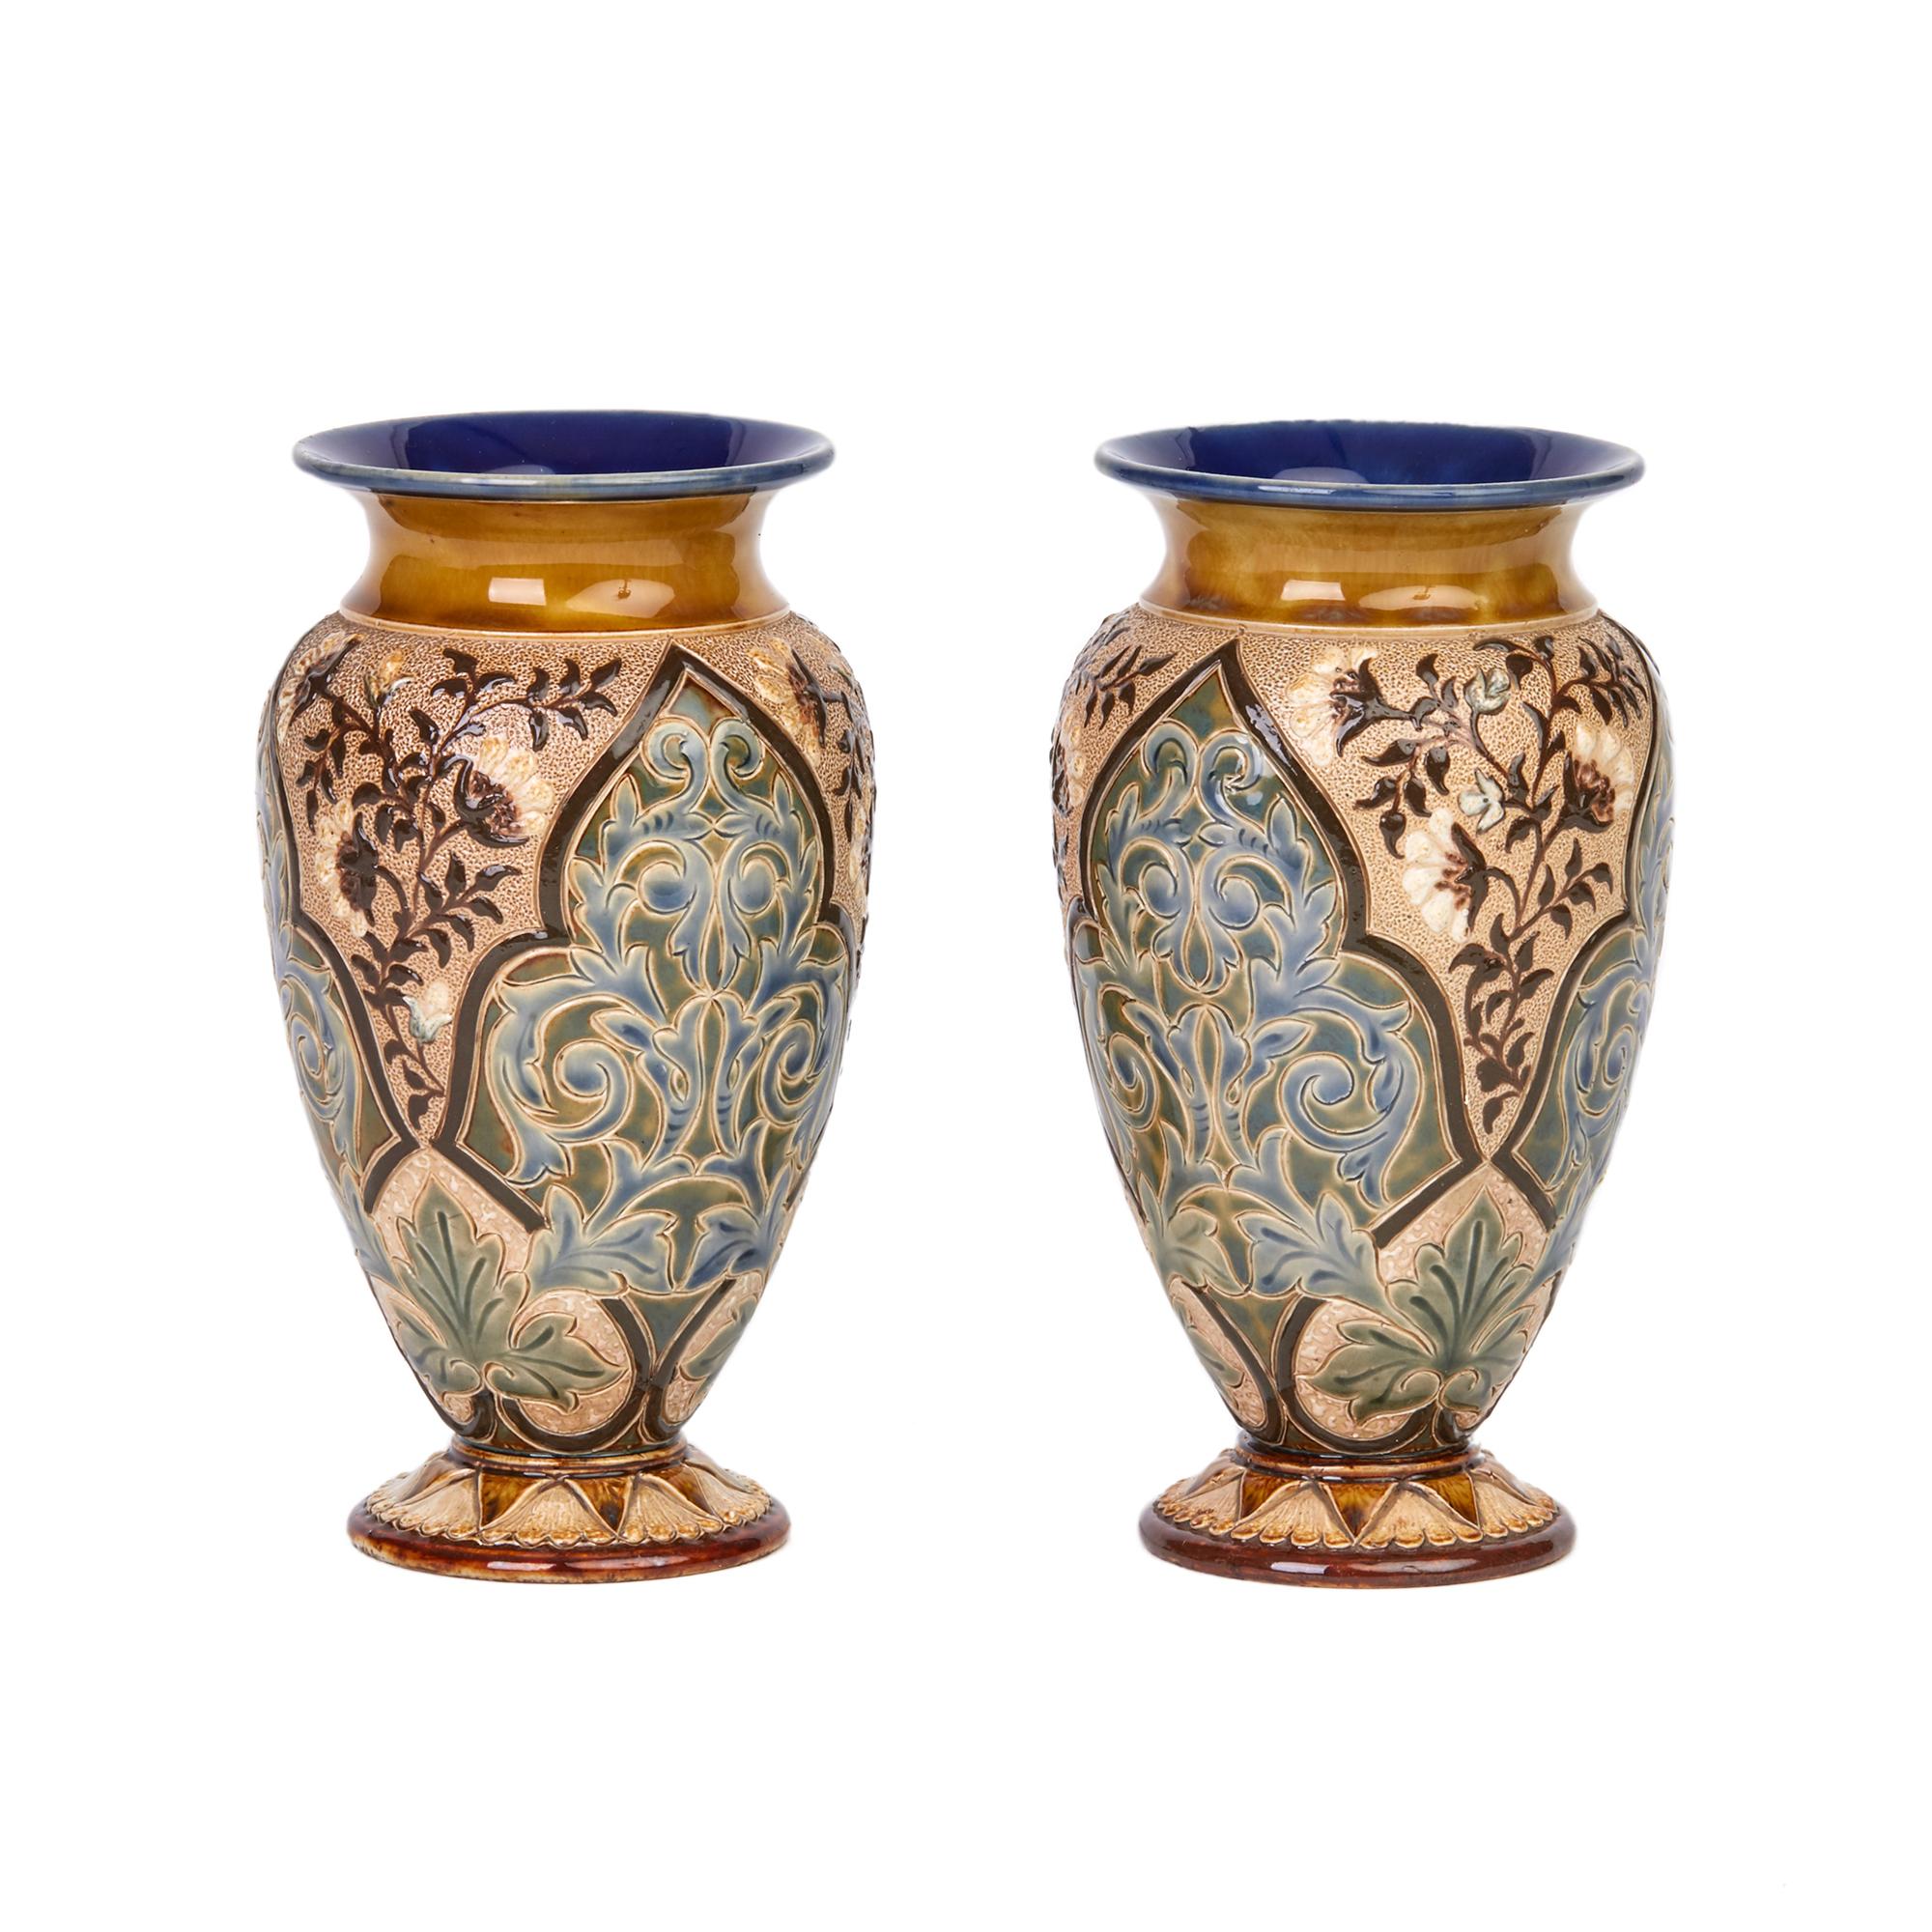 An exceptional and rare pair antique Doulton Lambeth art pottery stoneware vases exquisitely decorated with abstract scrolling leaf panels set between flowering stems made by Alice M E Barker and assisted by Alice Smith both dates 1883. The bulbous